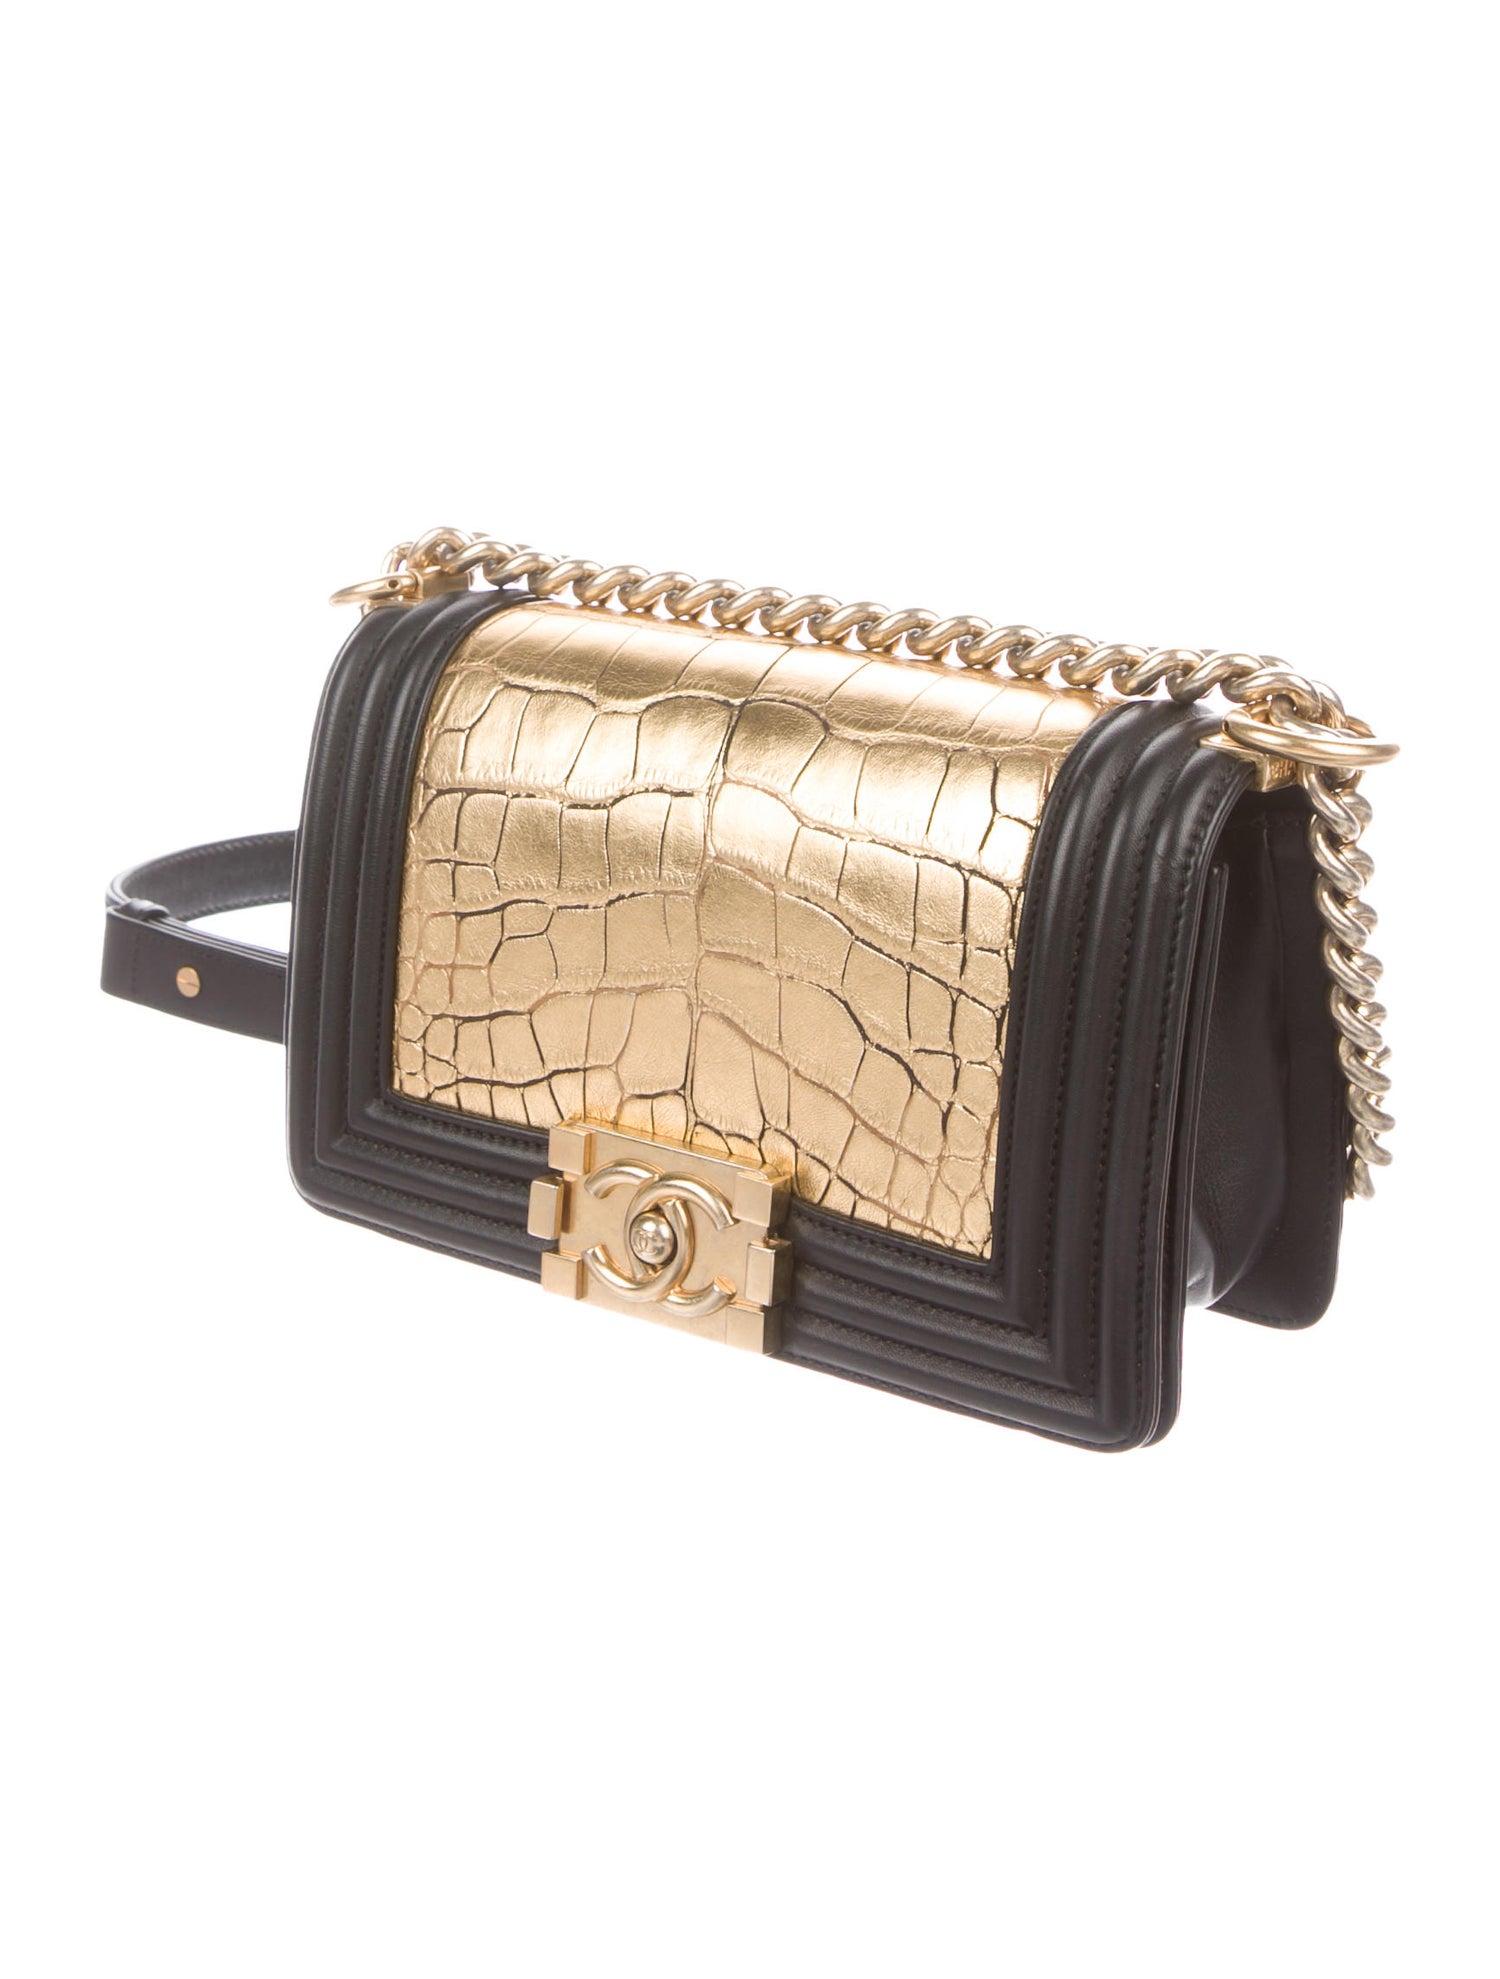 Chanel Black Leather Gold Alligator Exotic Boy Small Shoulder Flap Bag in Box

Alligator 
Leather
Gold-tone hardware
Leather lining
Push-lock closure 
Date code present 
Made in France
Top handle drop 12